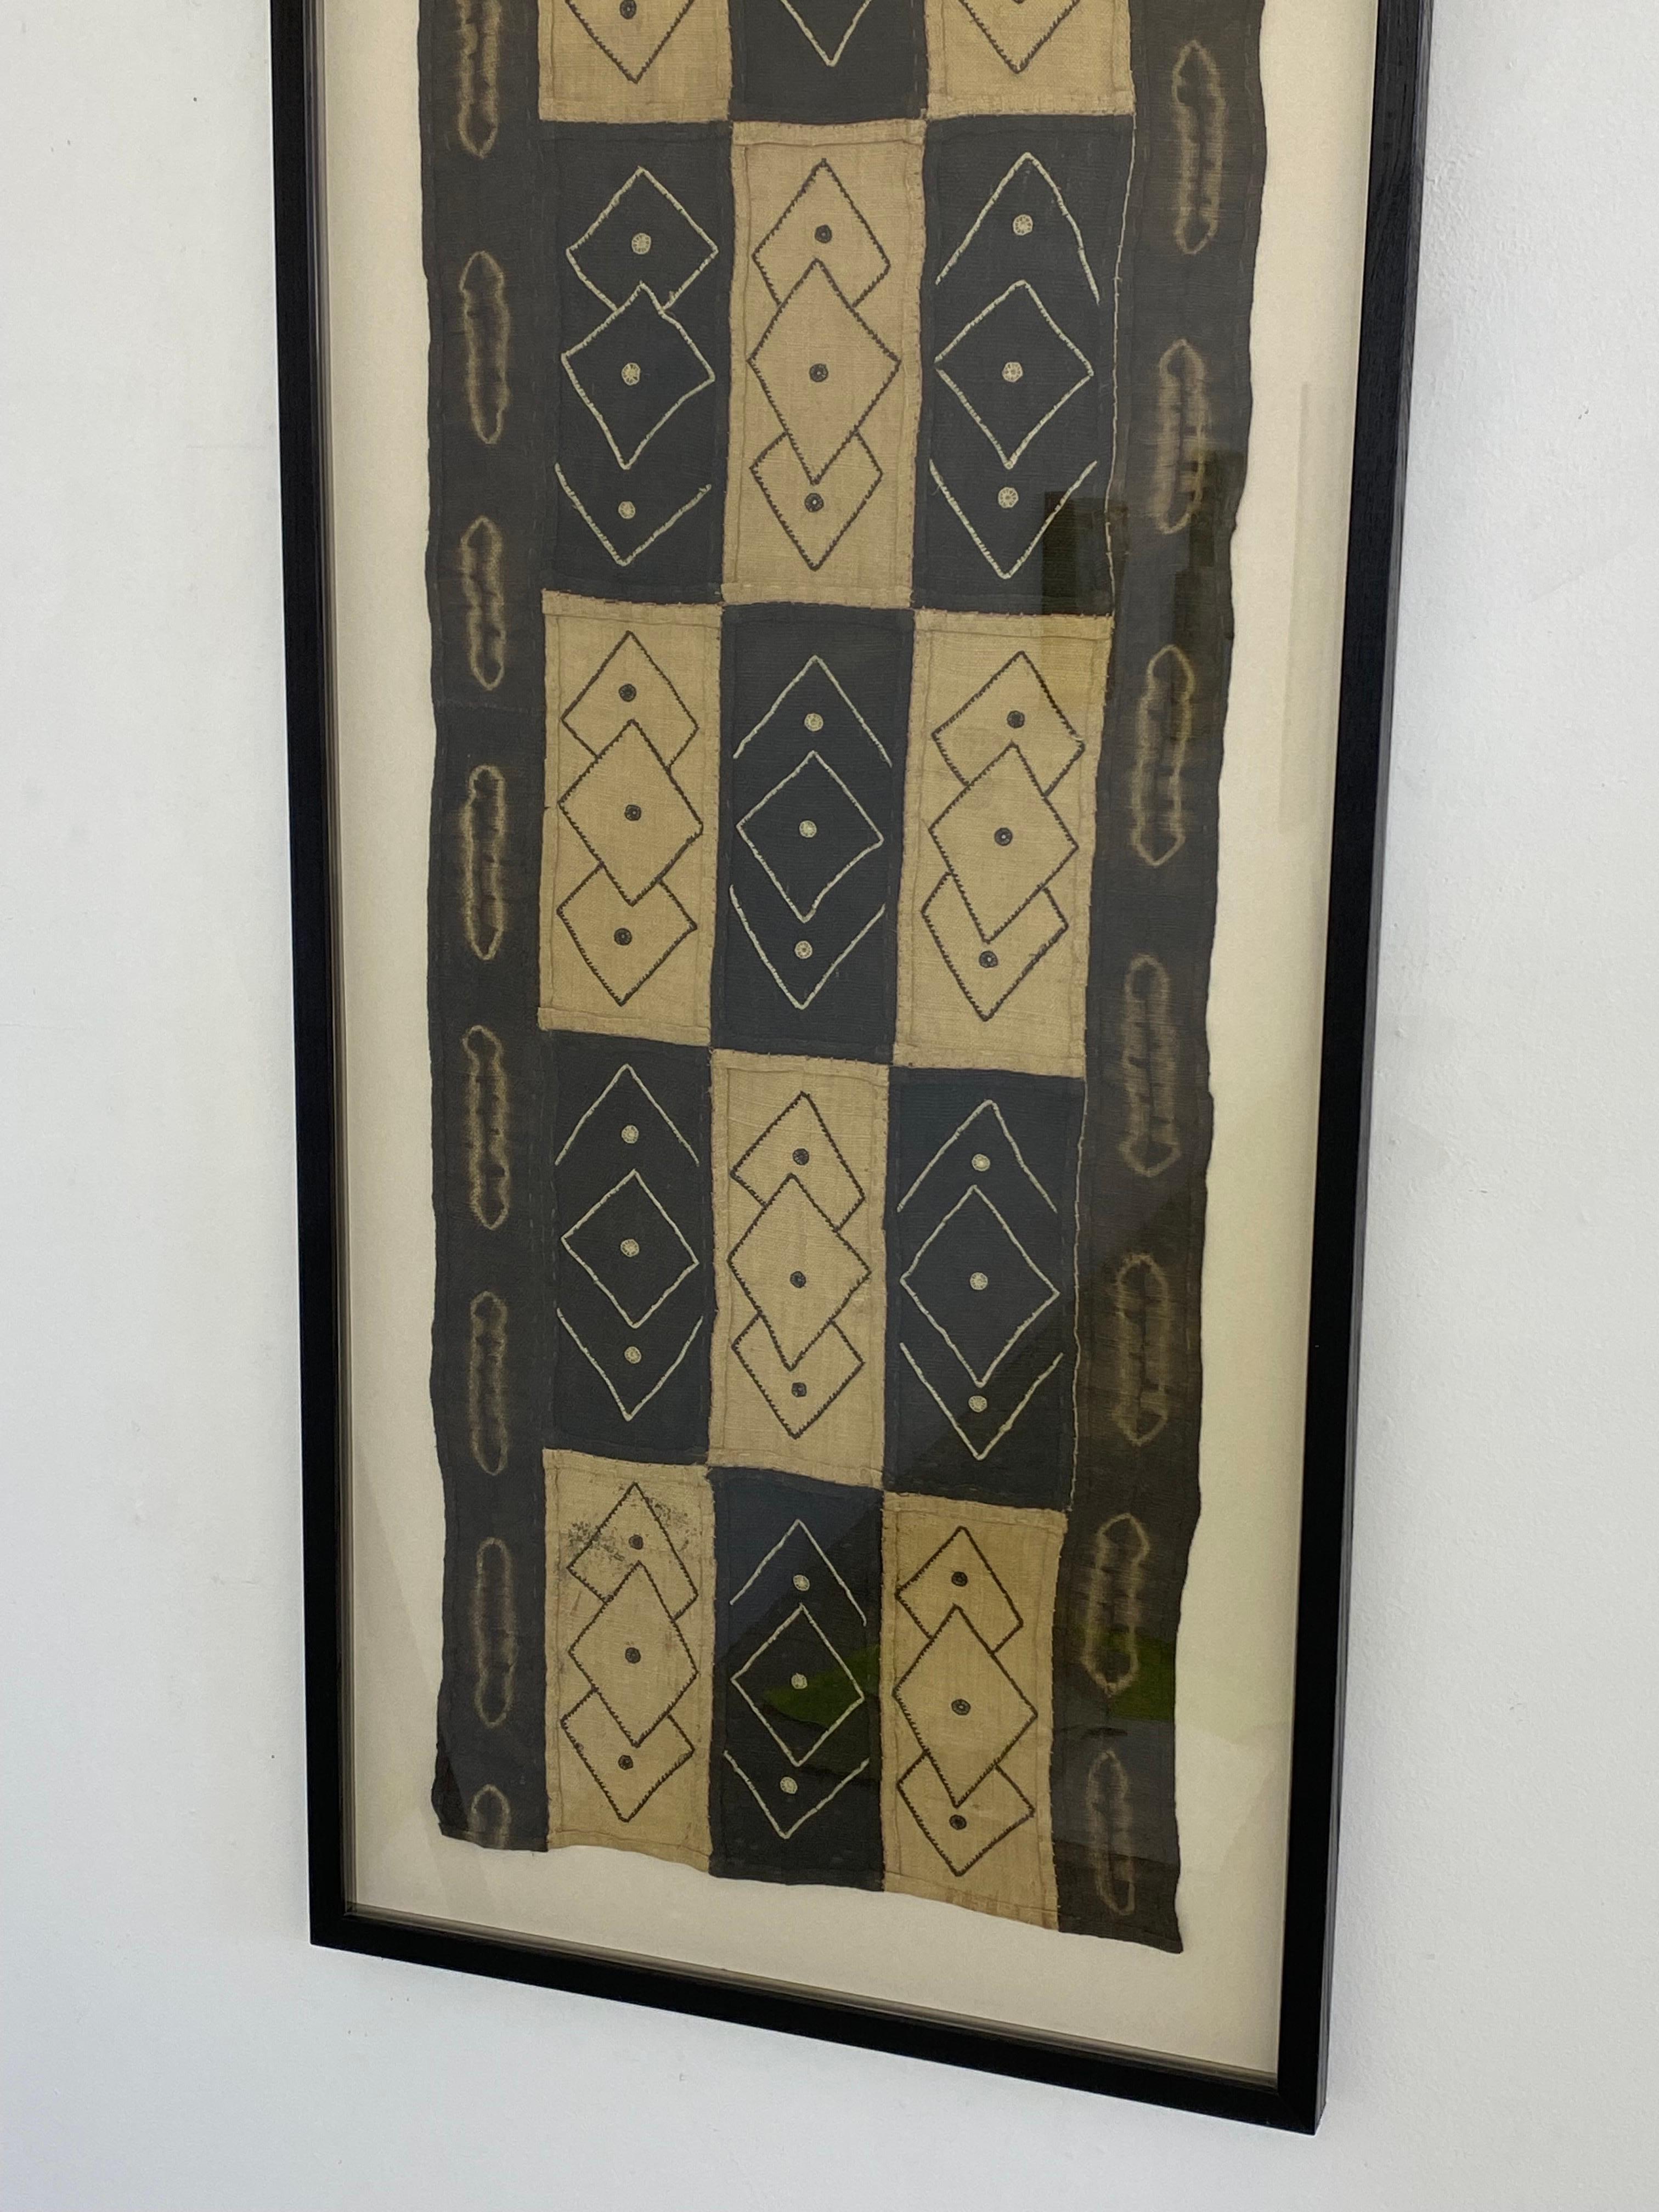 Kuba Textile, Geometric Design with elaborate and complex surface decoration.  Nicely Framed in a black oak frame.  Dates to the mid-70's.  Would work in many rooms, nice statement!